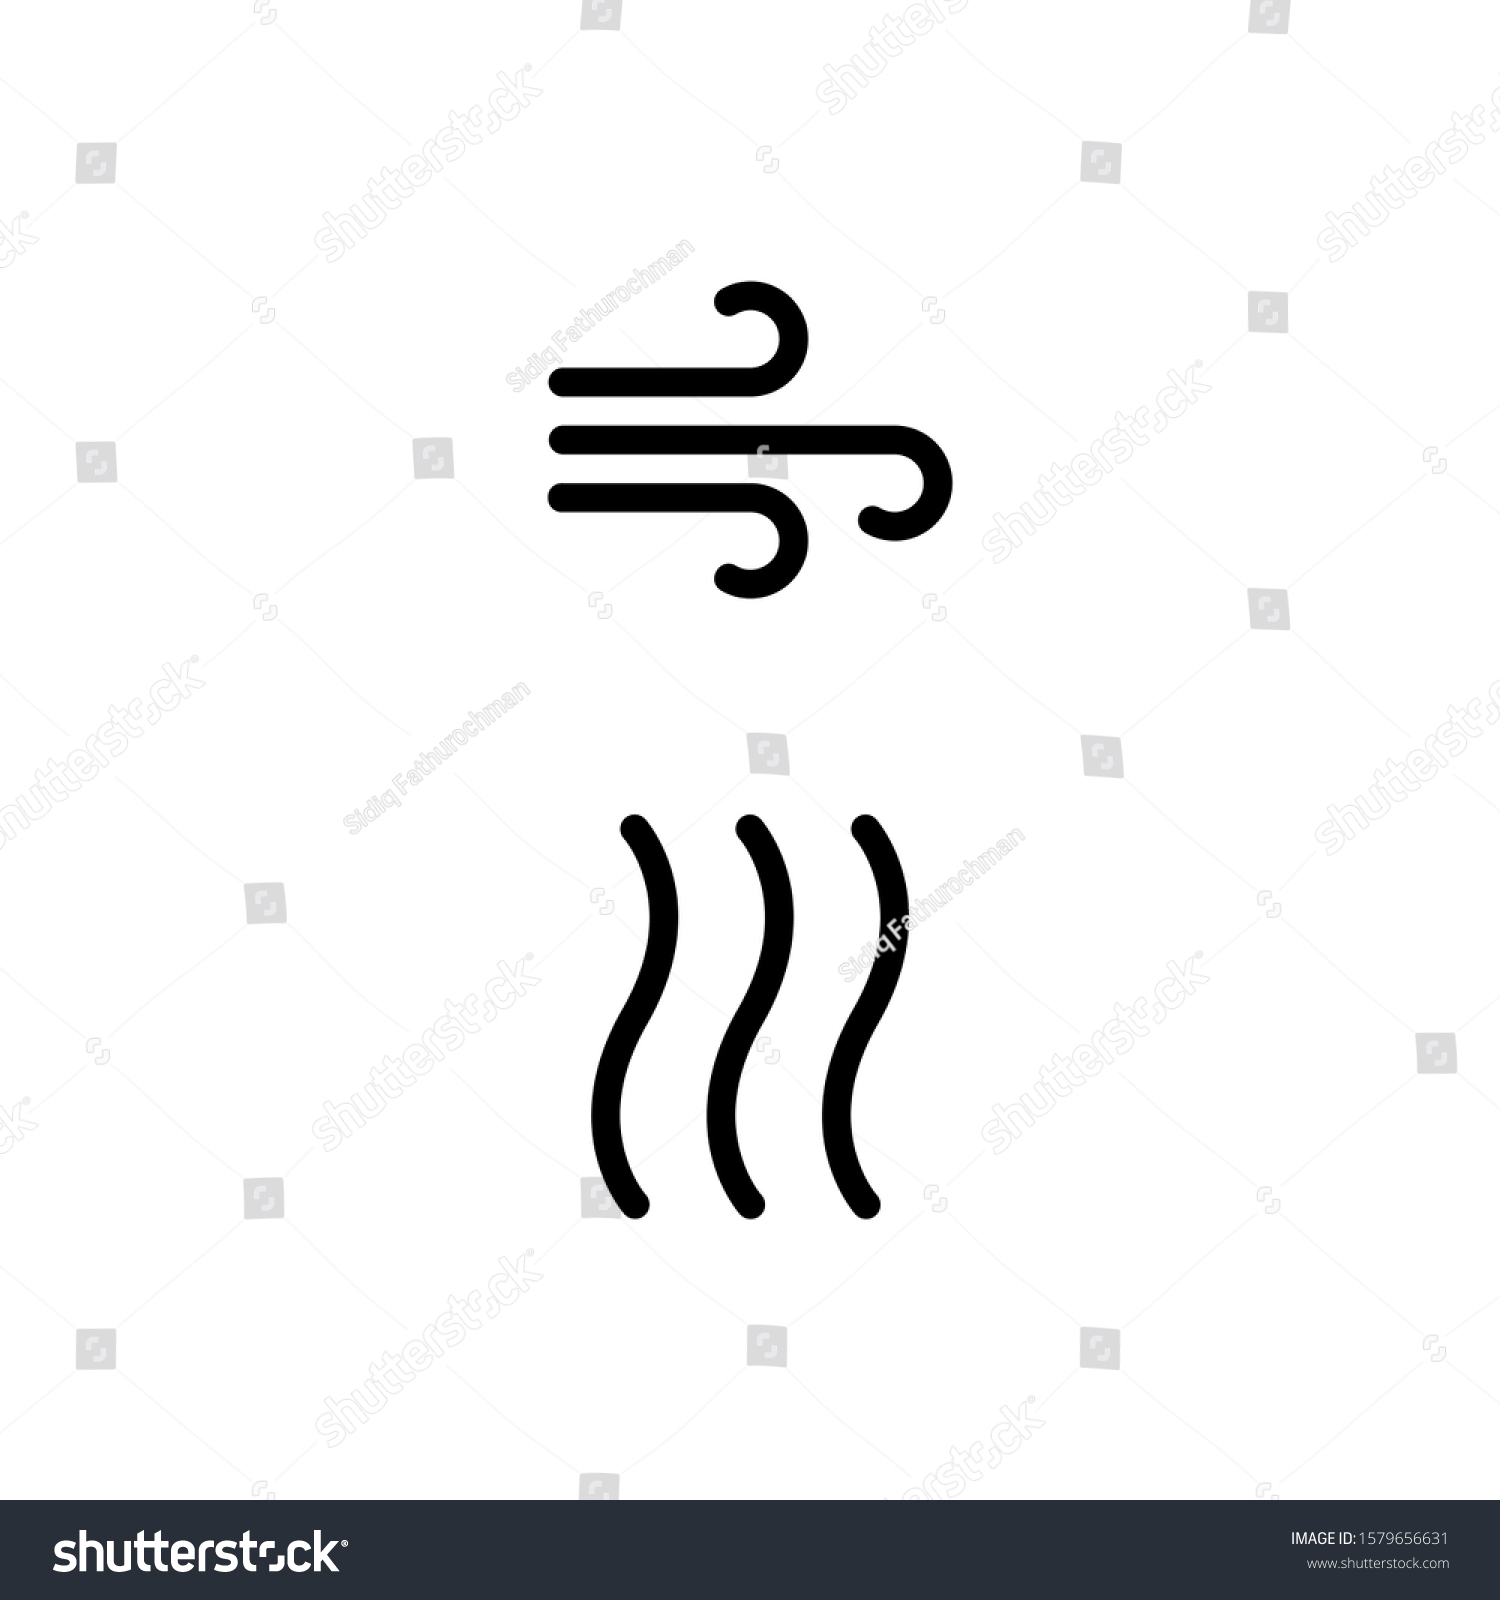 SVG of Air & Wind Icon. Nature Icon Set Vector Logo Symbol.
 svg